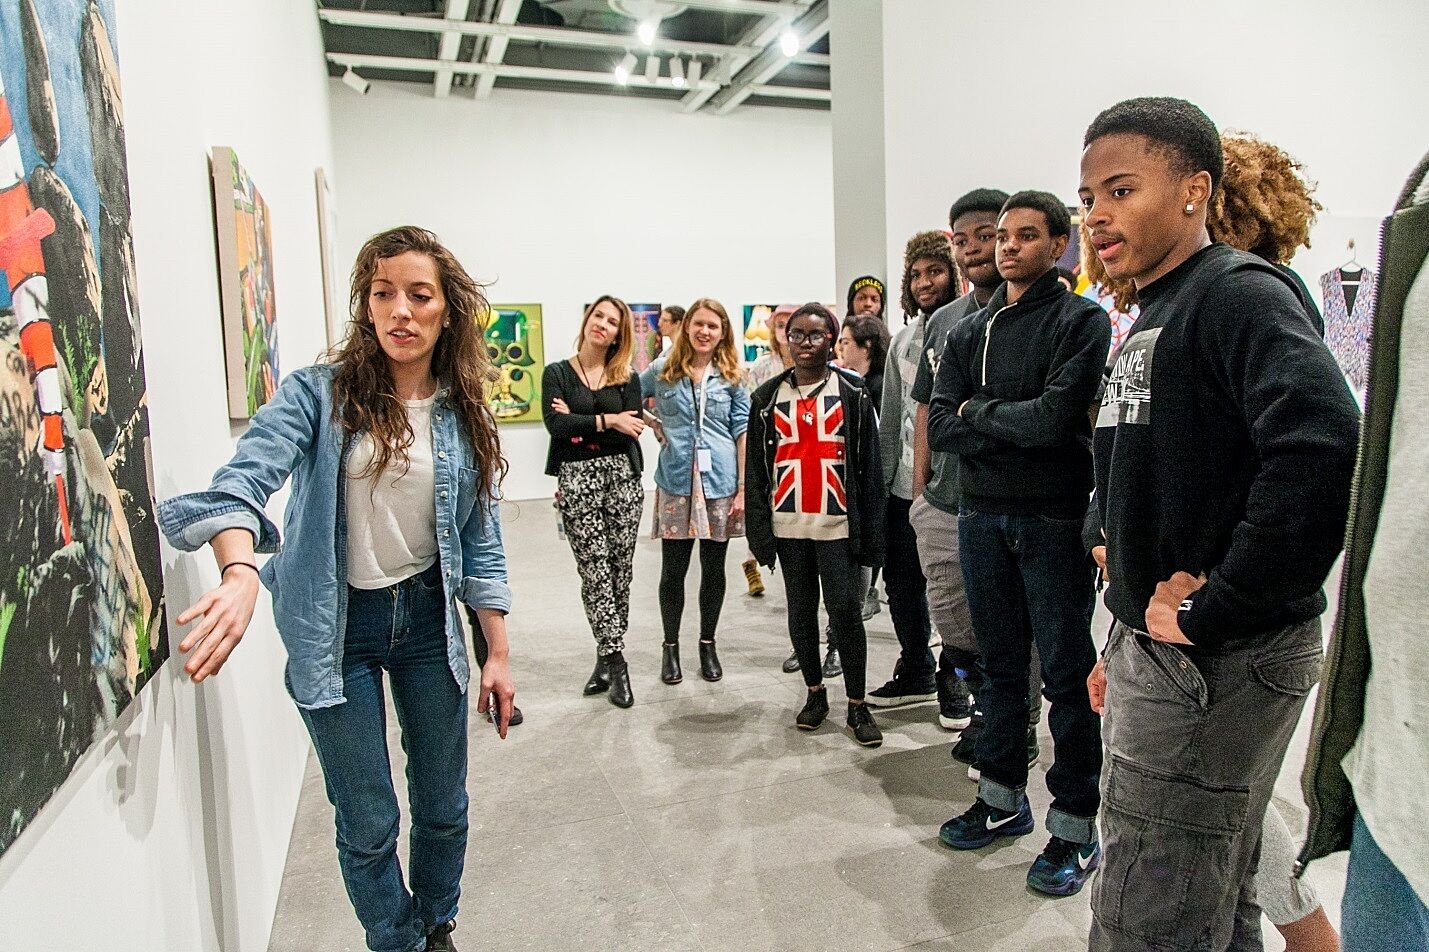 Artist Jamian Juliano-Villani shows off her work to students in the gallery.